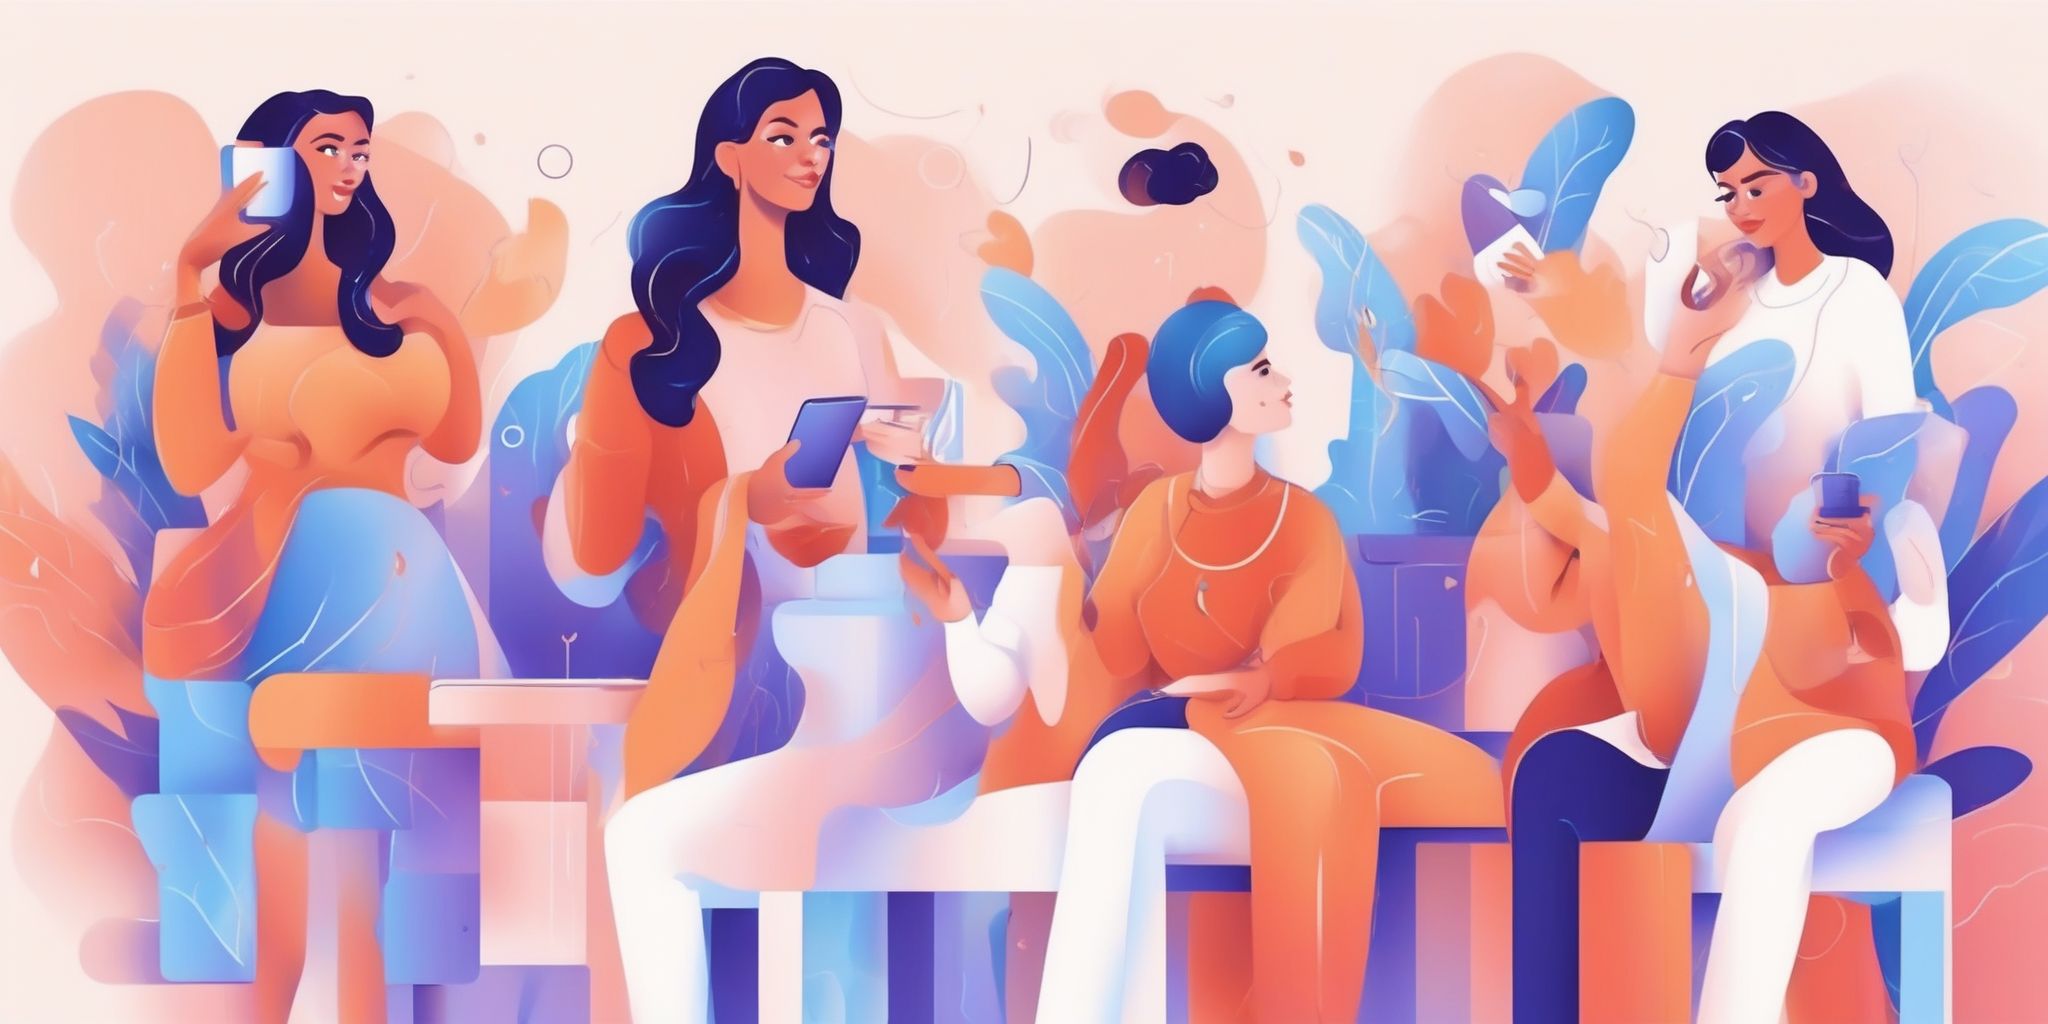 Influencer partnerships in illustration style with gradients and white background